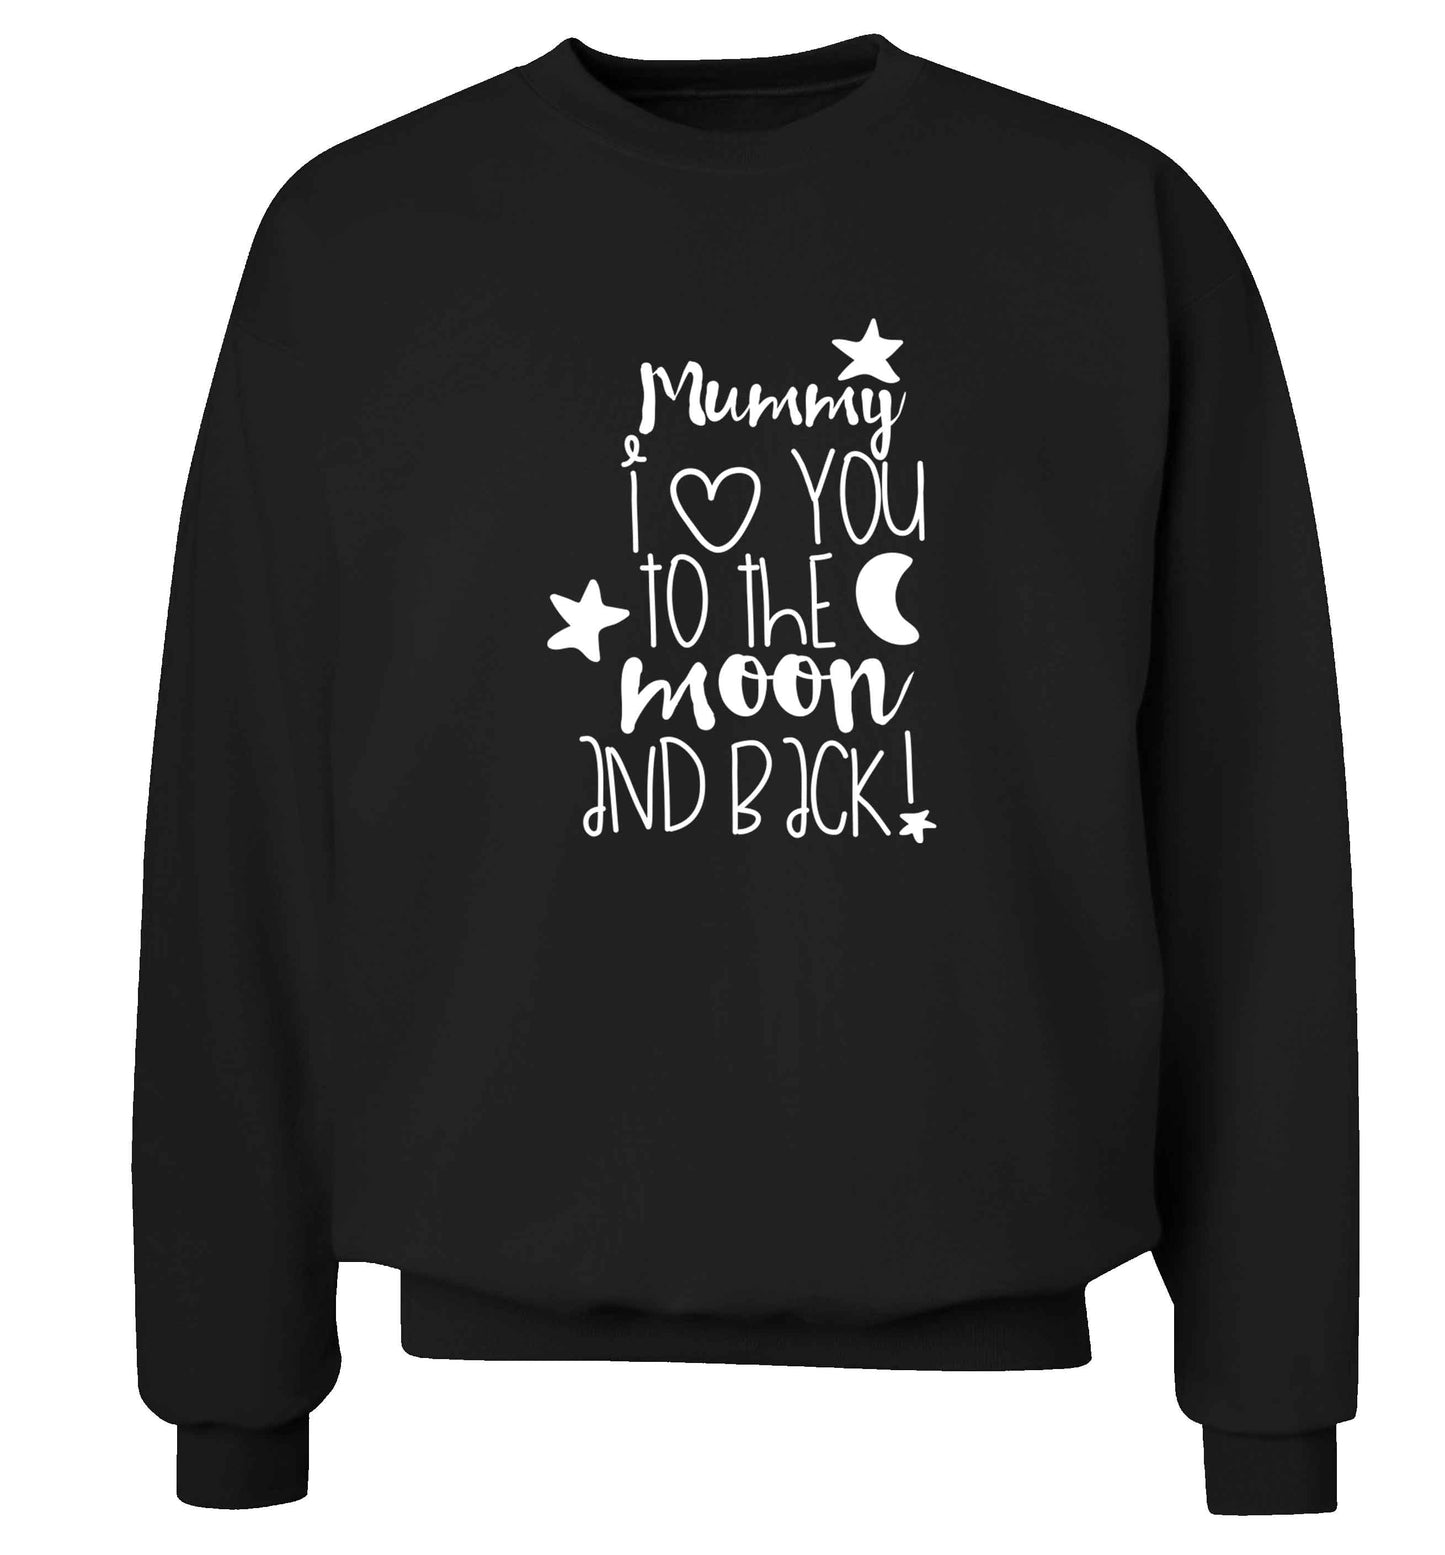 Mummy I love you to the moon and back adult's unisex black sweater 2XL